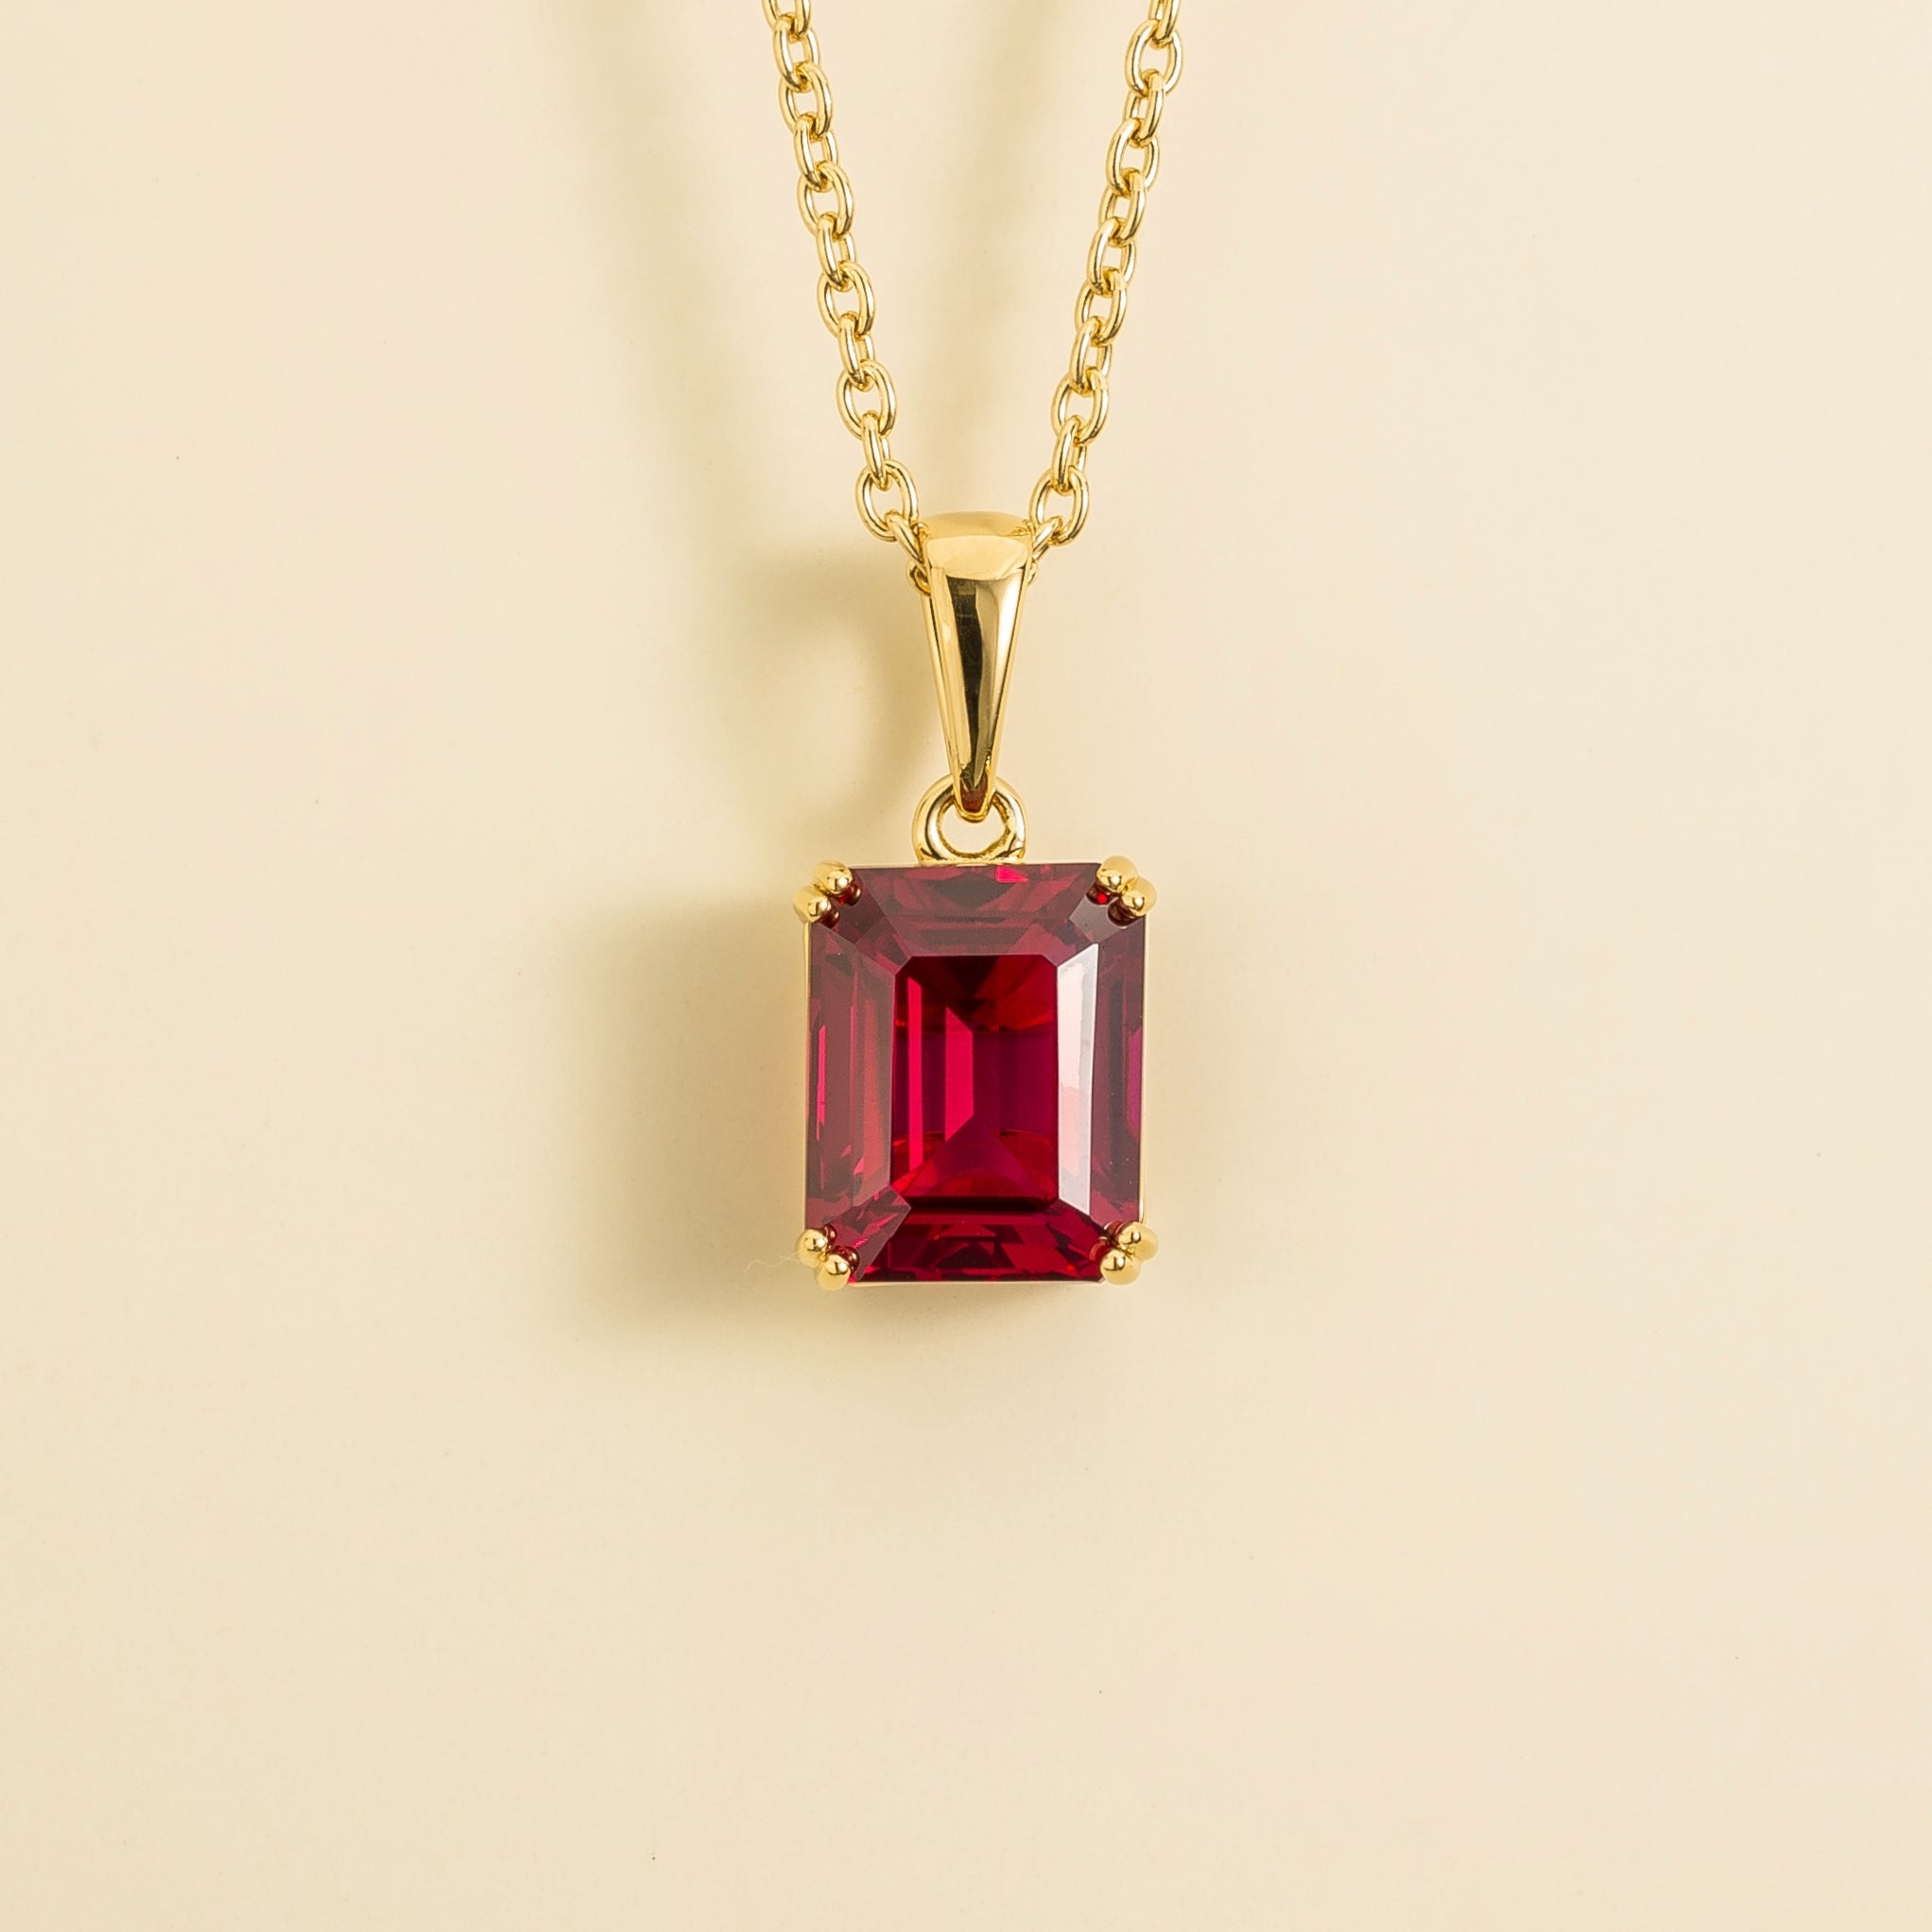 Ruby Necklace Juvetti Jewellery London Thamani Gold Pendant Necklace In Ruby